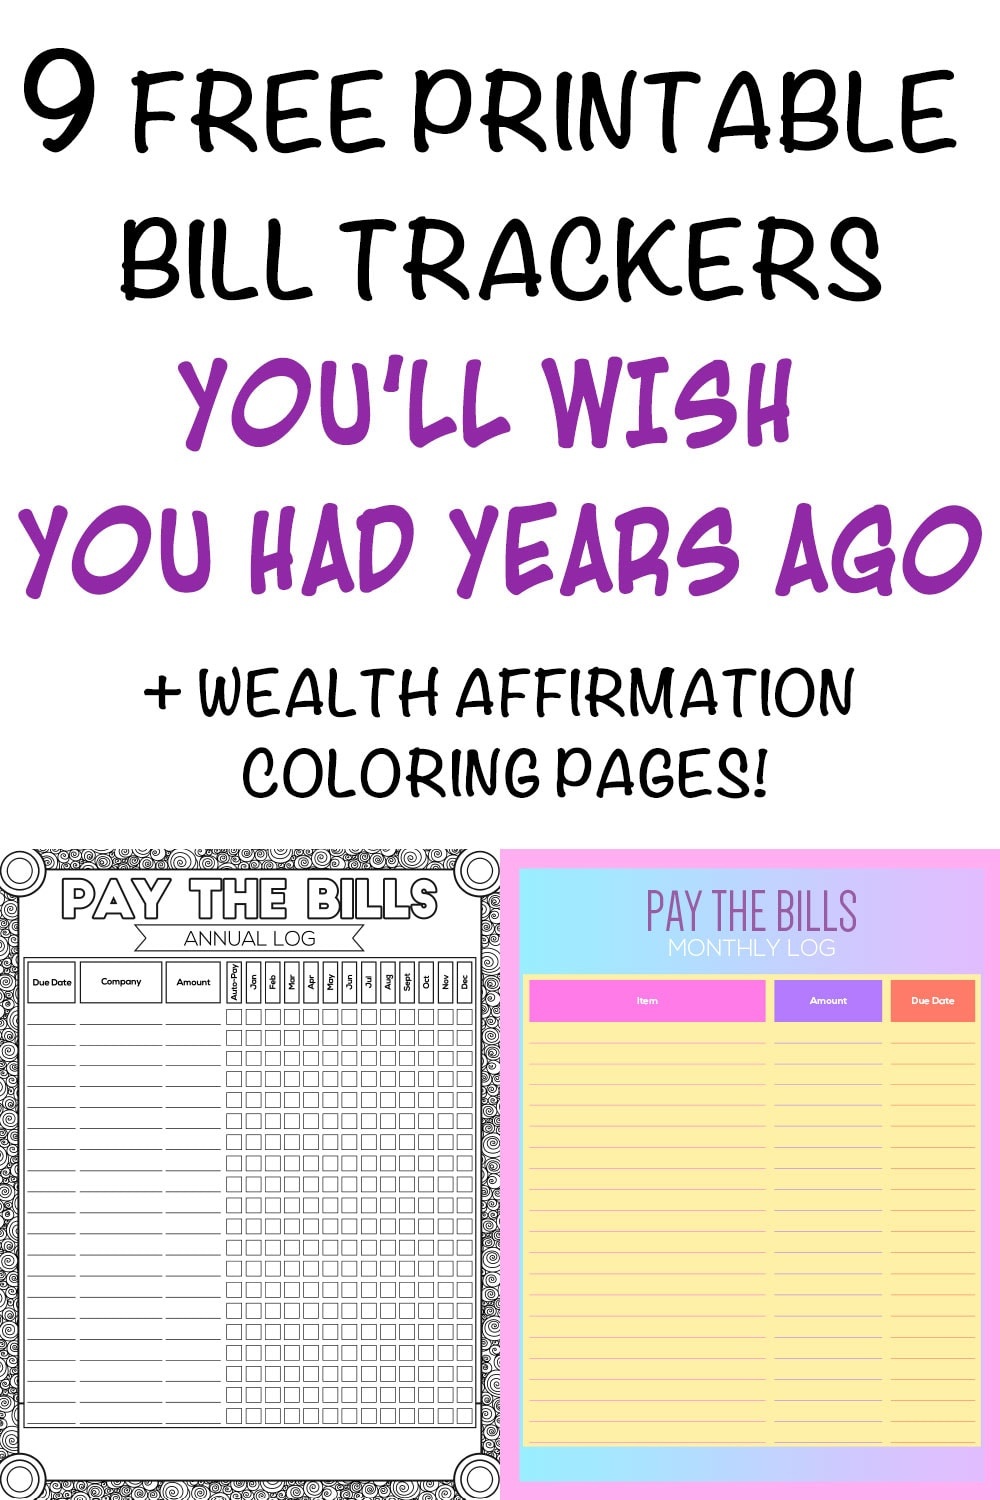 9 Printable Bill Payment Checklists And Bill Trackers - The Artisan Life - Free Printable Bill Checklist